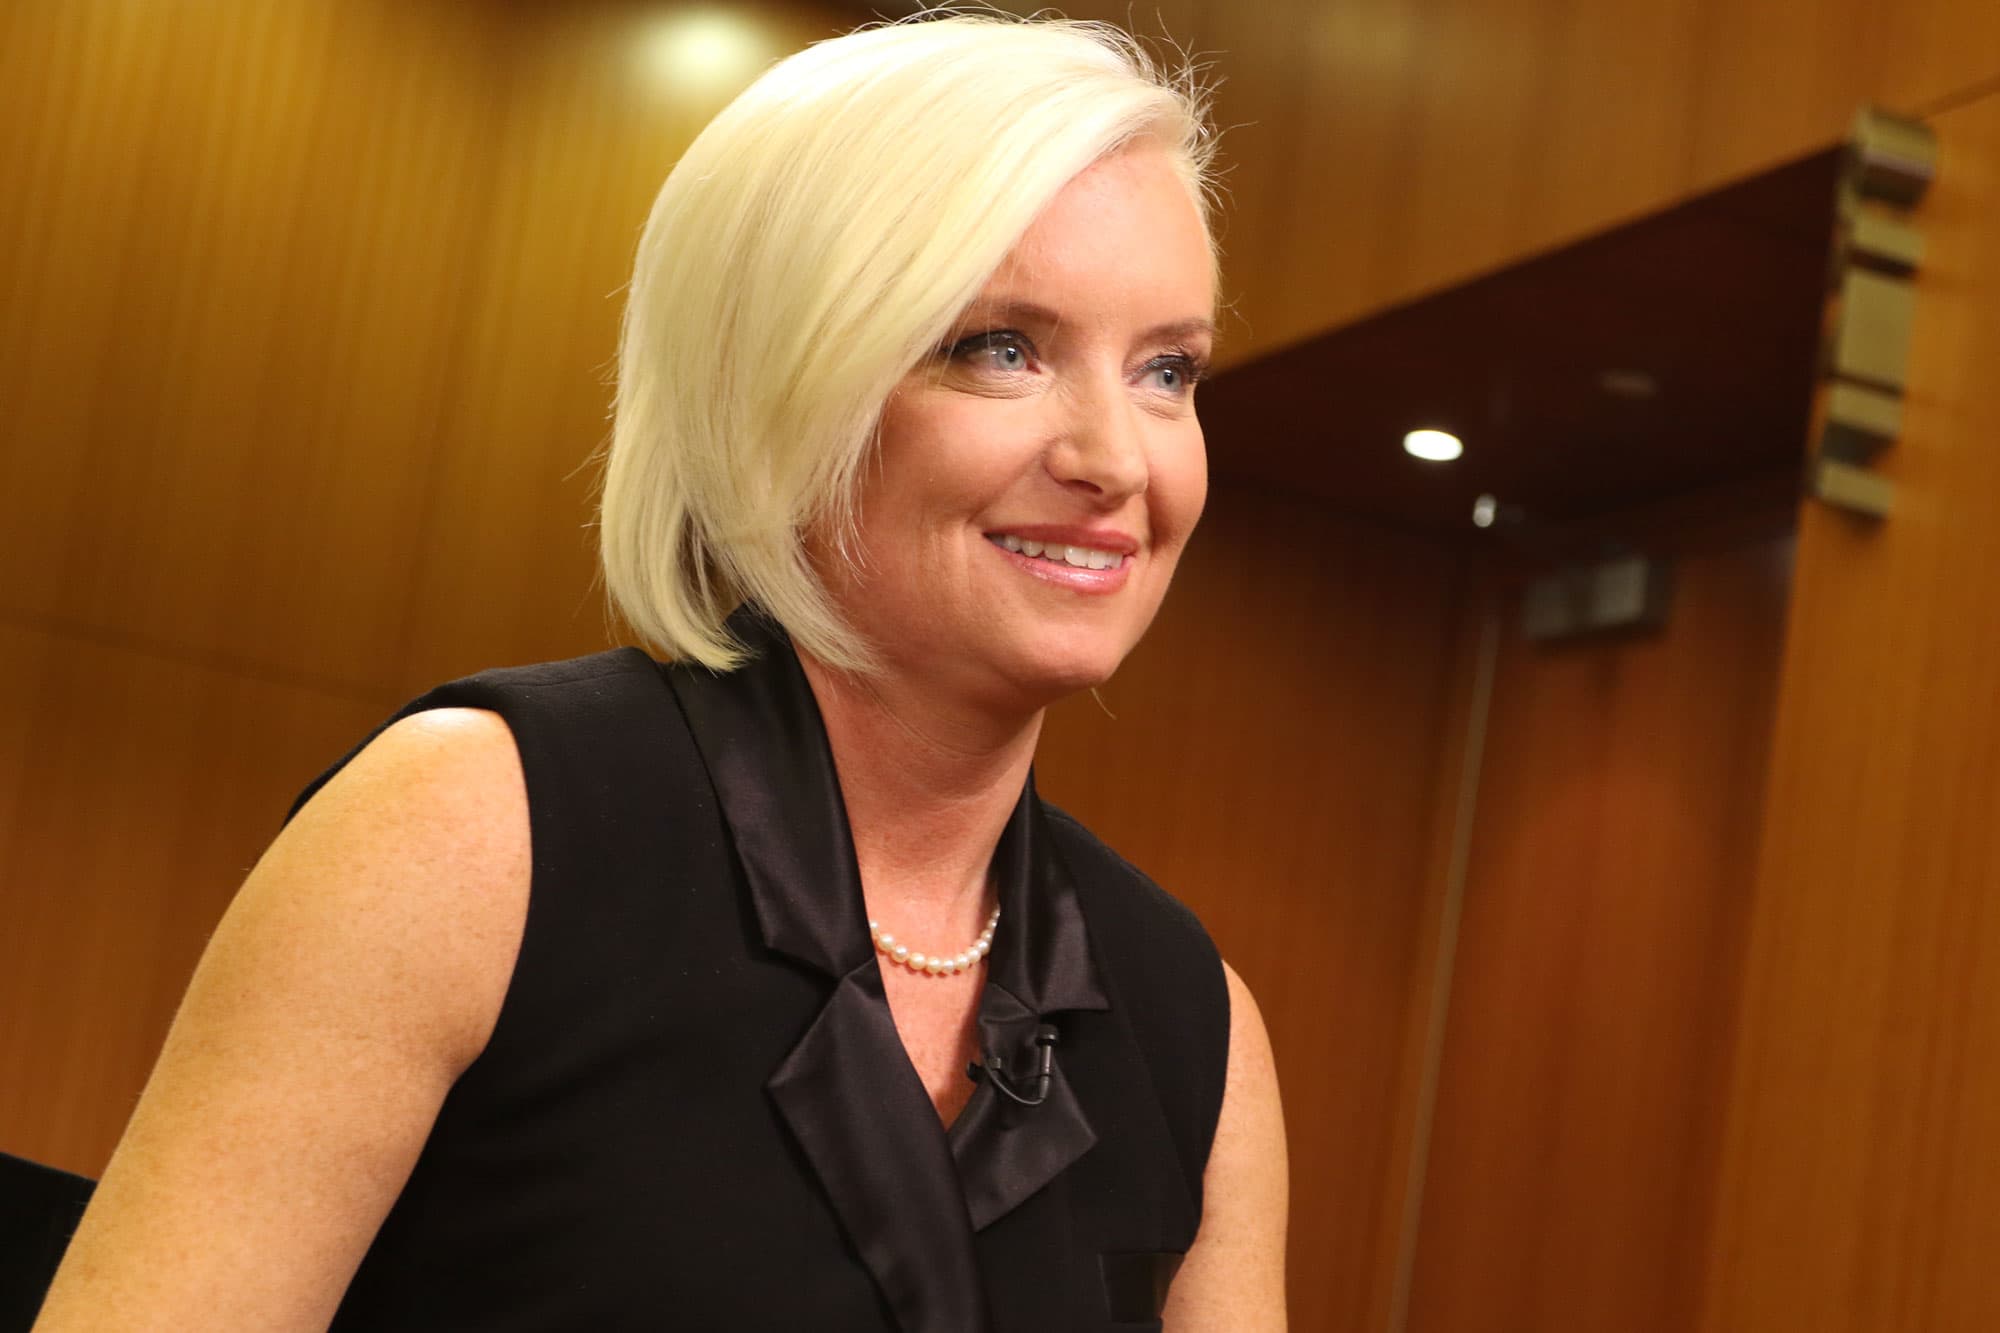 Instacart president Carolyn Everson announces departure just three months after she started